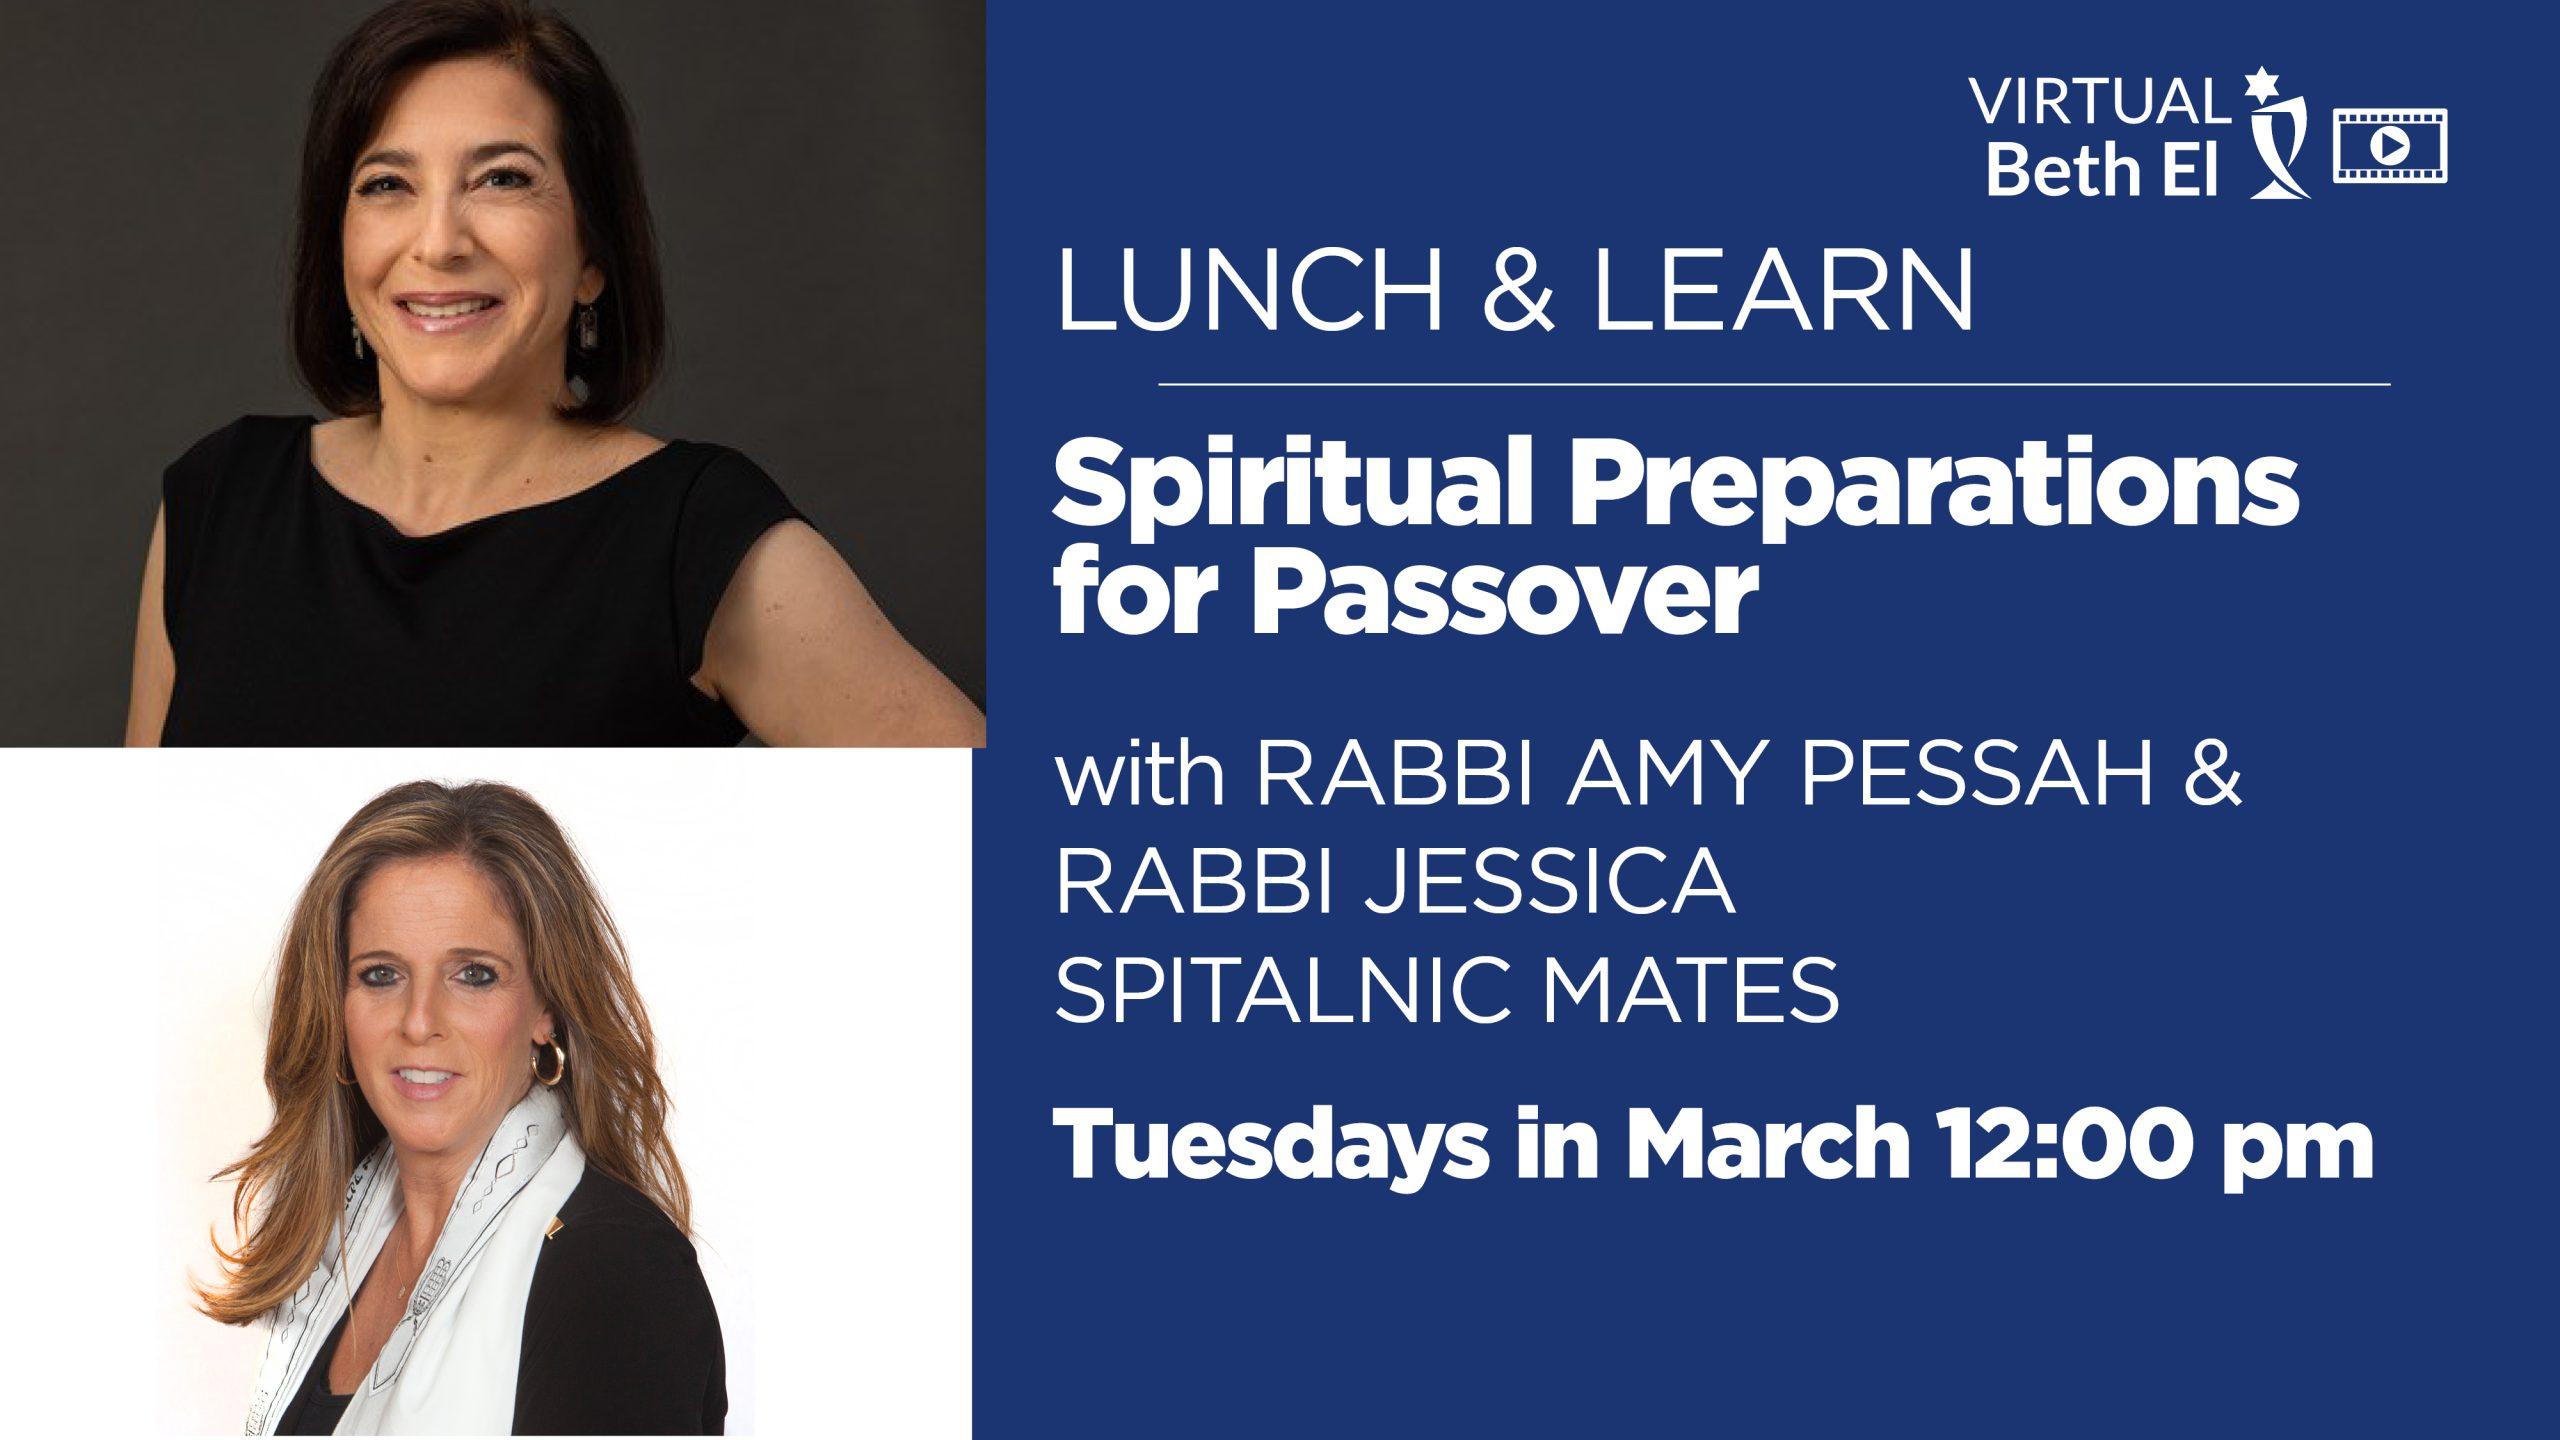 Lunch and Learn: Spiritual Preparations for Passover event graphic for Temple Beth El of Boca Raton